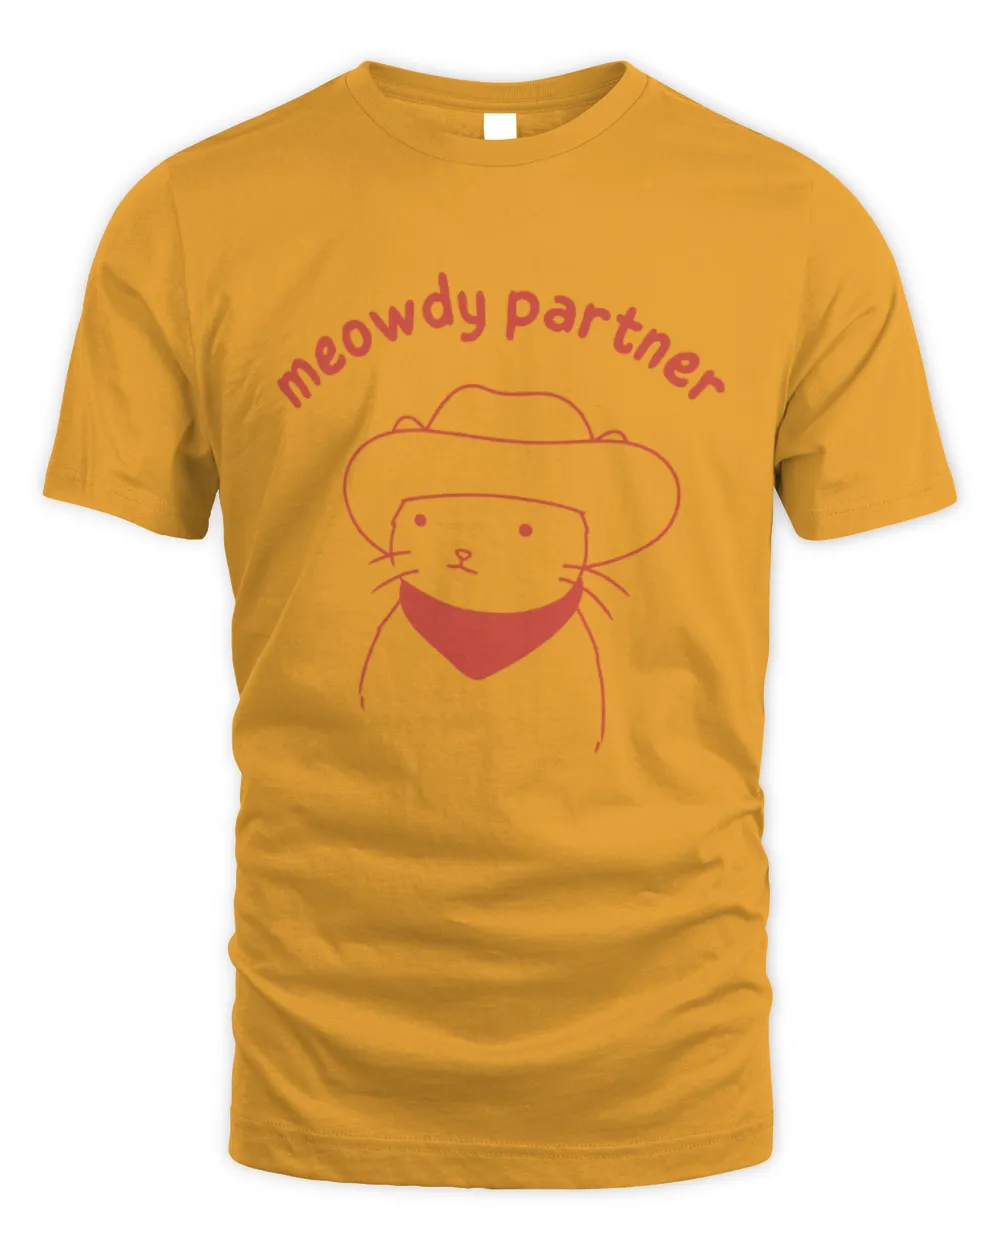 Meowdy partner T-Shirt, Cat Lover Hoodie,  Funny Meme Sweatshirt, Cowboy Cat Shirt, Kitty Tee, Country Western Top, Cat Owner Clothing Gift